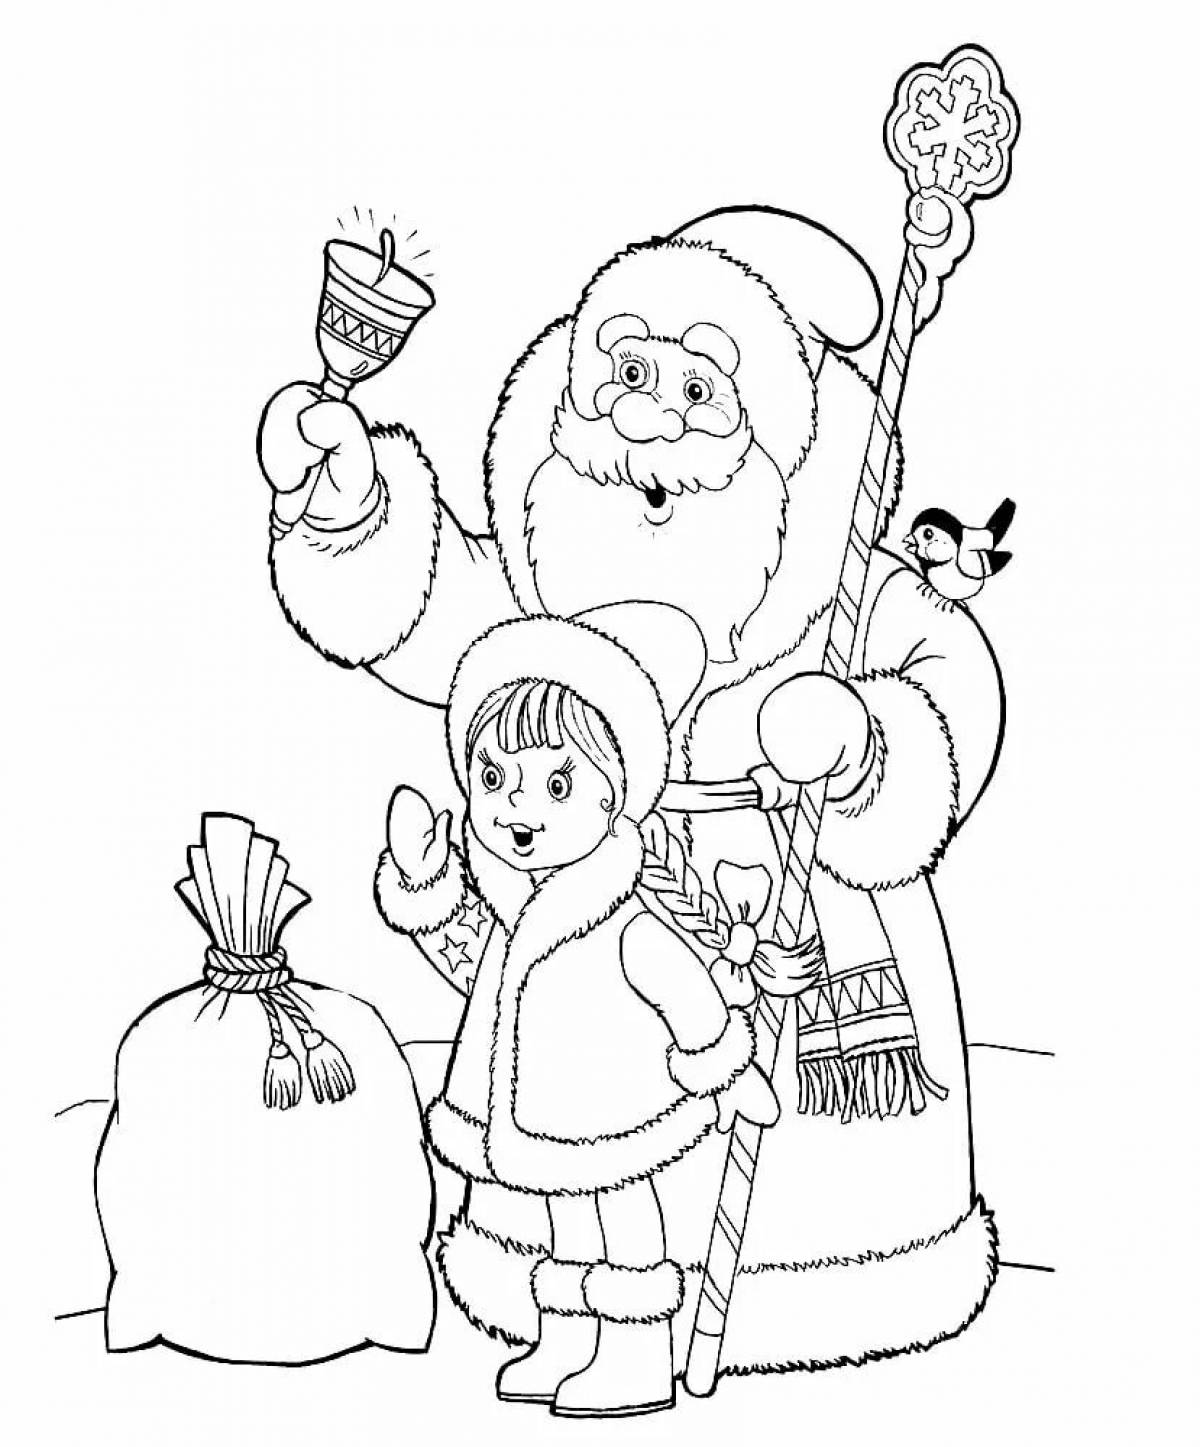 Charming drawing of Santa Claus and Snow Maiden